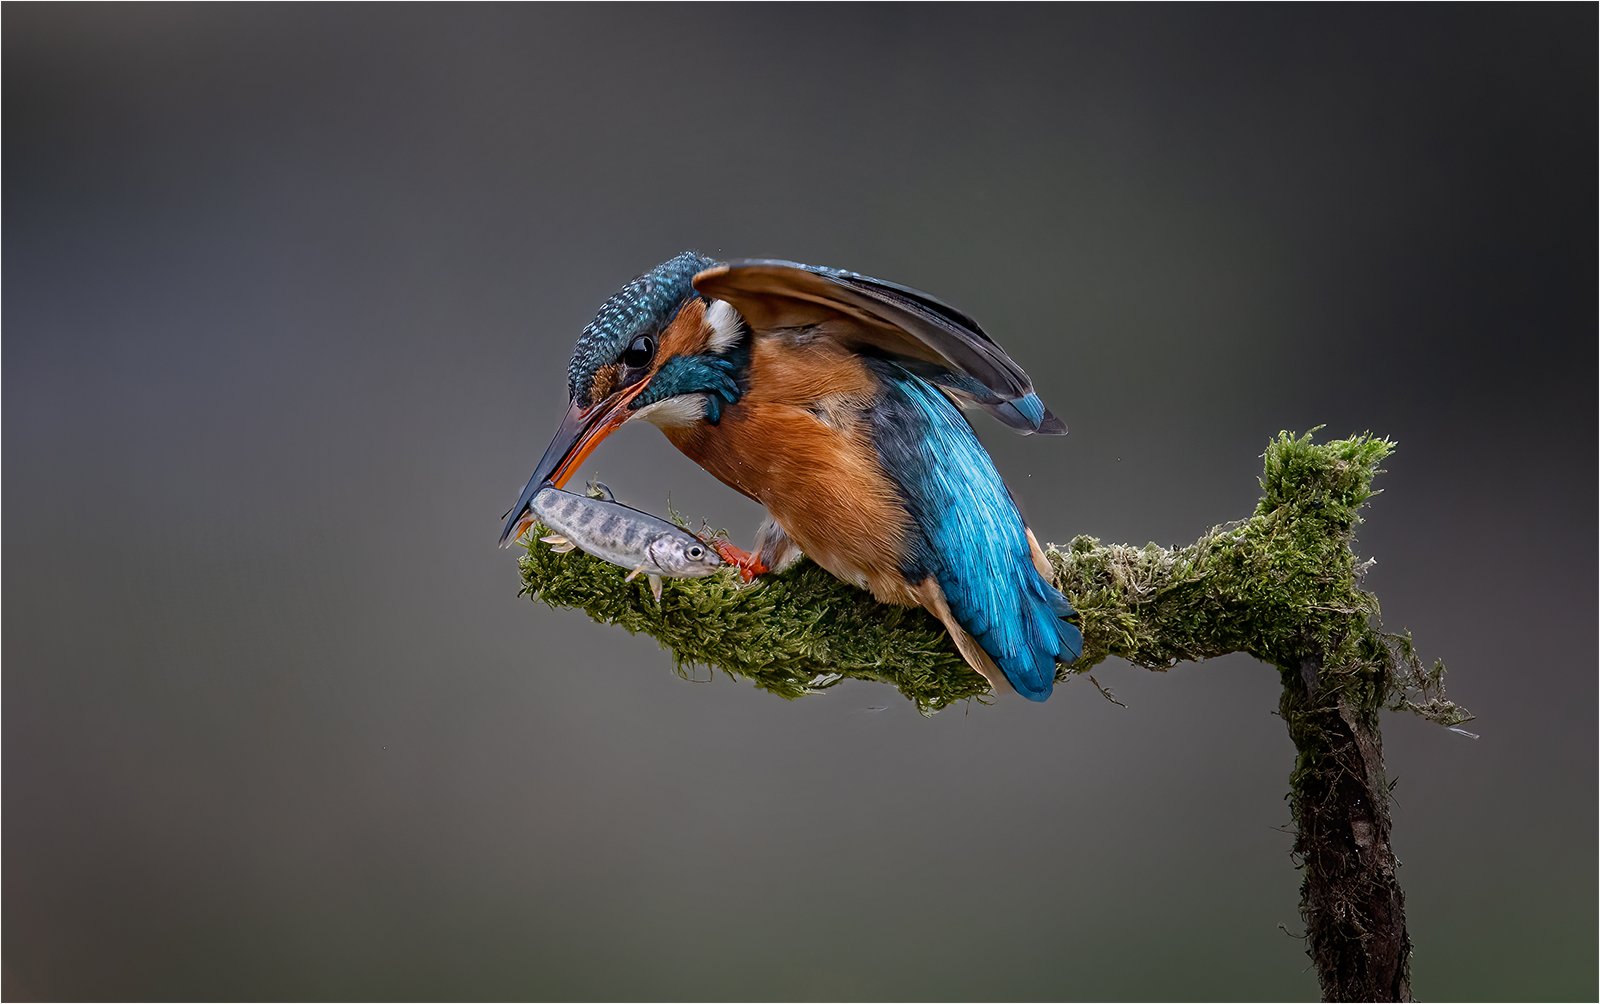 'Kingfisher and Catch'